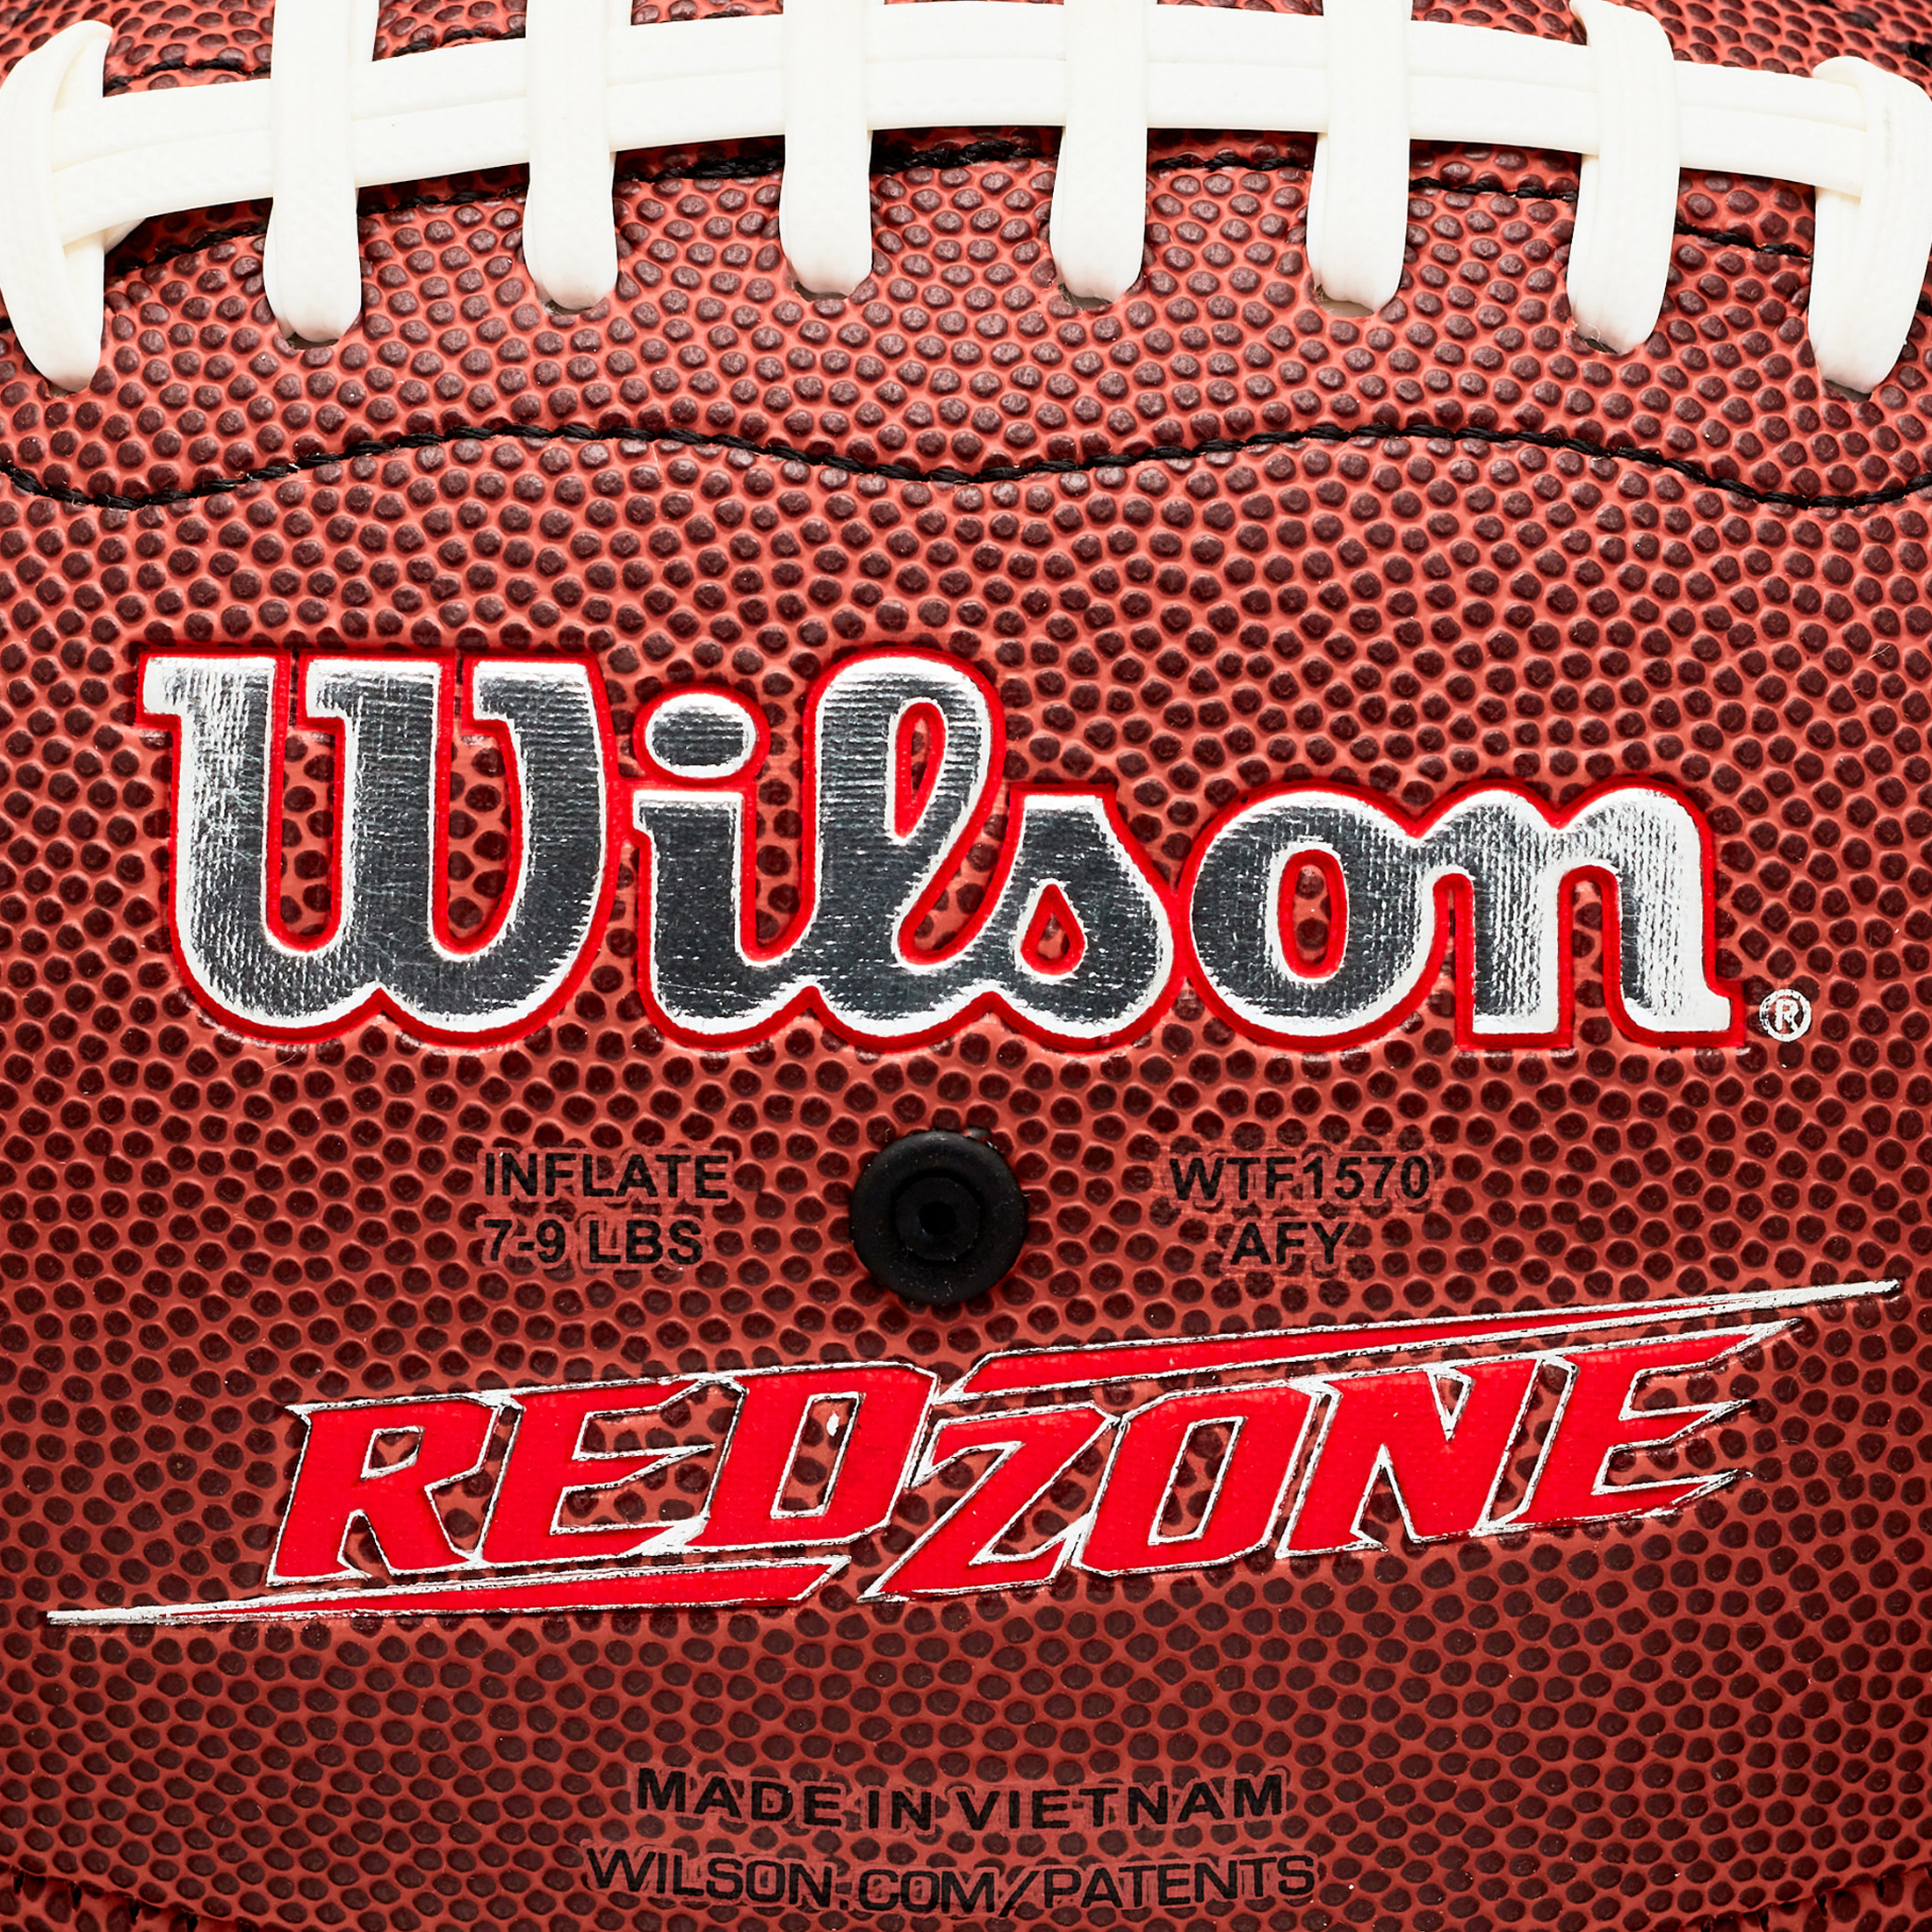 Wilson NCAA Red Zone Composite Football, Official Size (Ages 14 and up) - image 3 of 6